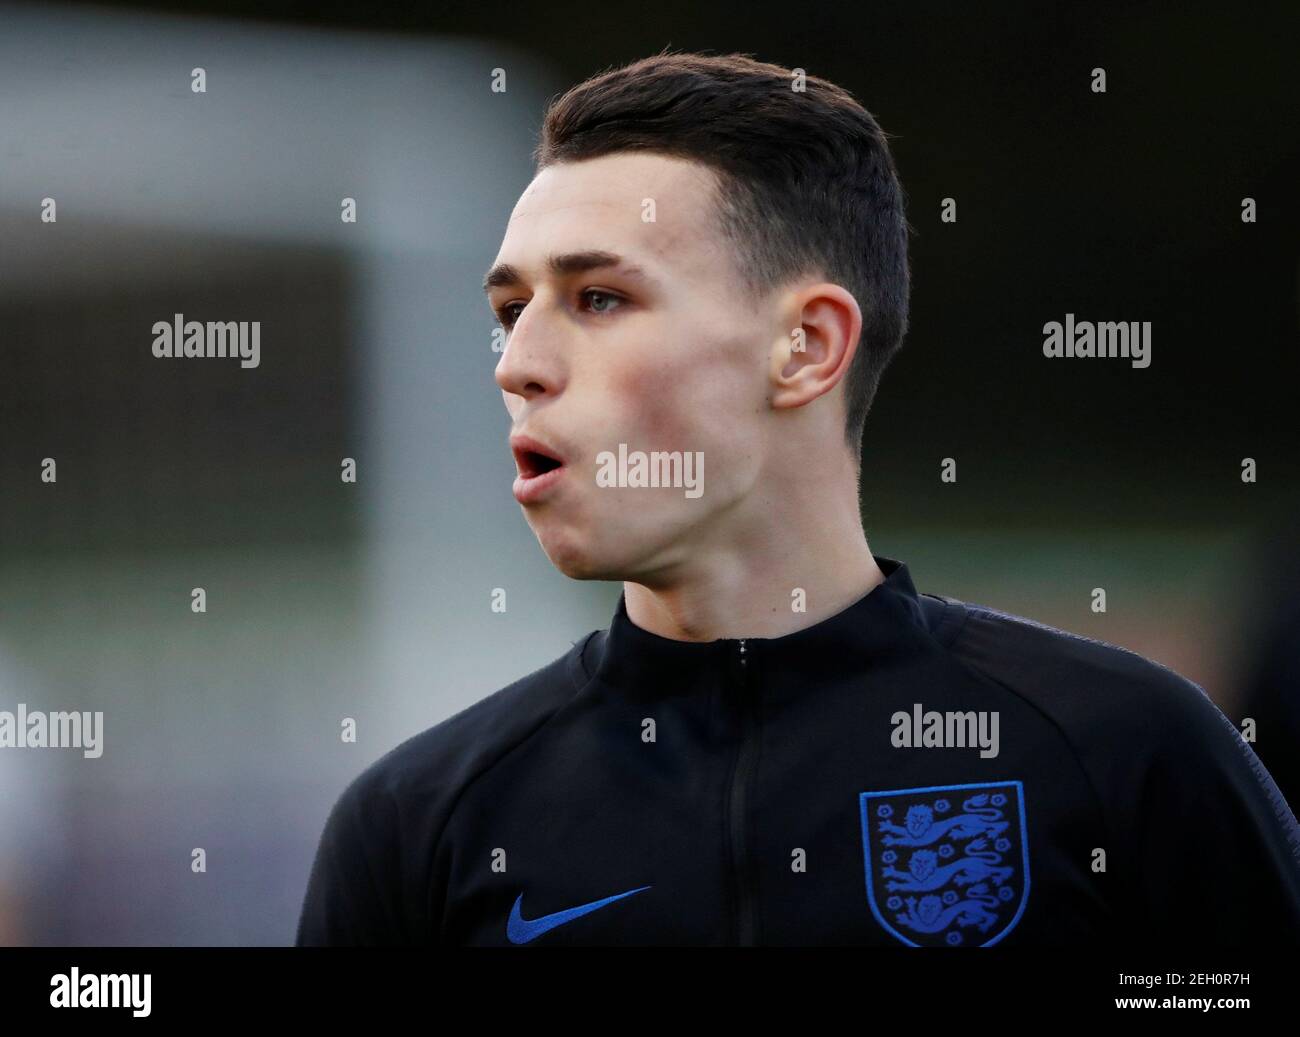 Soccer Football - England Under 21 Training - St. George's Park, Burton upon Trent, Britain - November 12, 2018   England's Phil Foden during training   Action Images via Reuters/Carl Recine Stock Photo